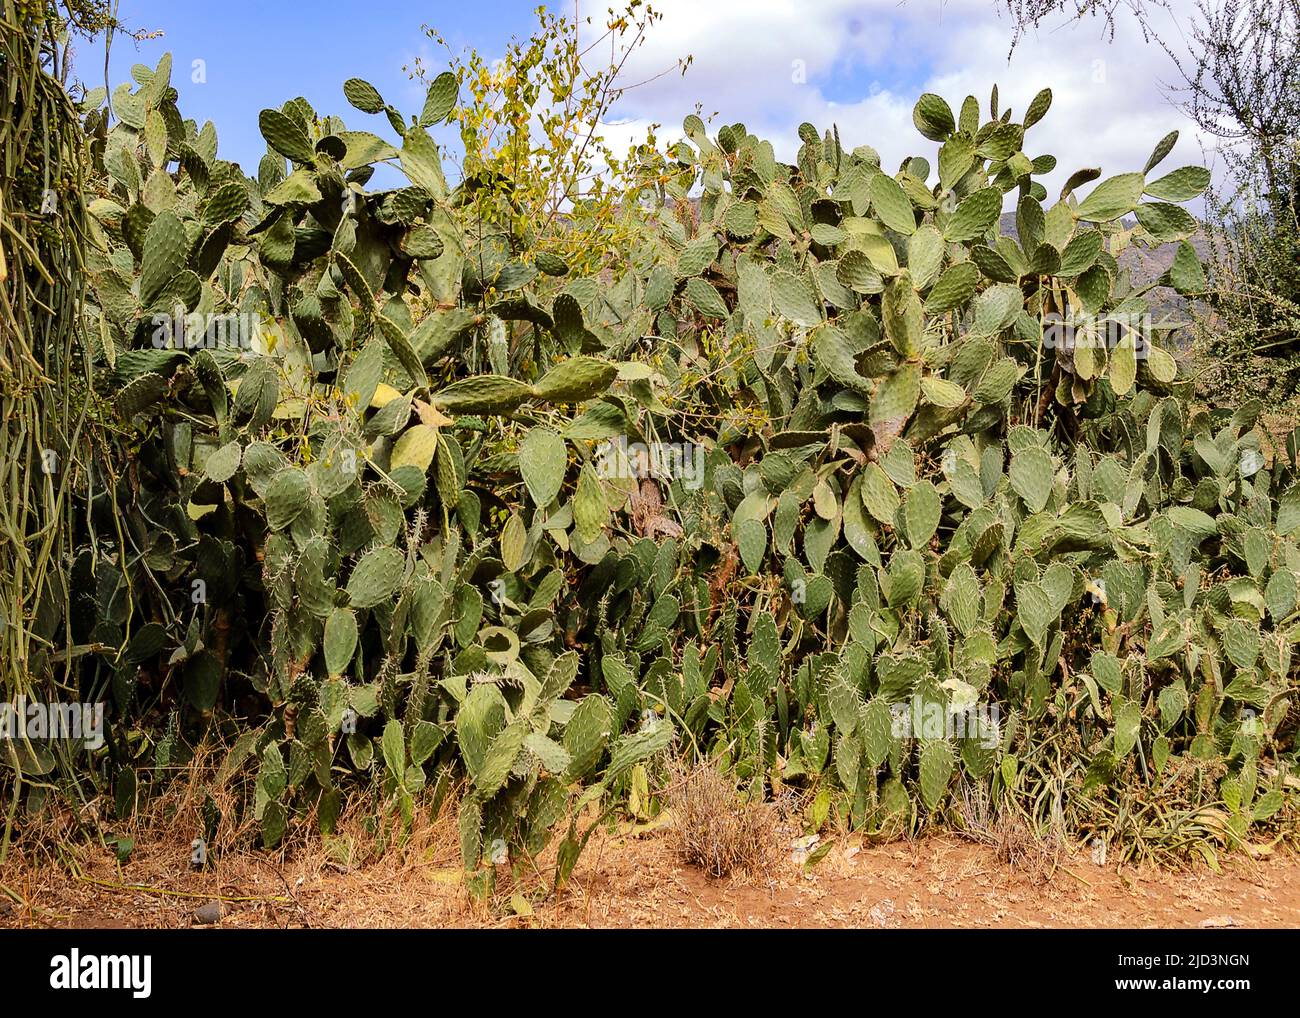 Opuntia stricta from Engaruka, Tanzania (2006).  This invasive cactus species represent a big problem in Tanzania and other East-African countries. It Stock Photo